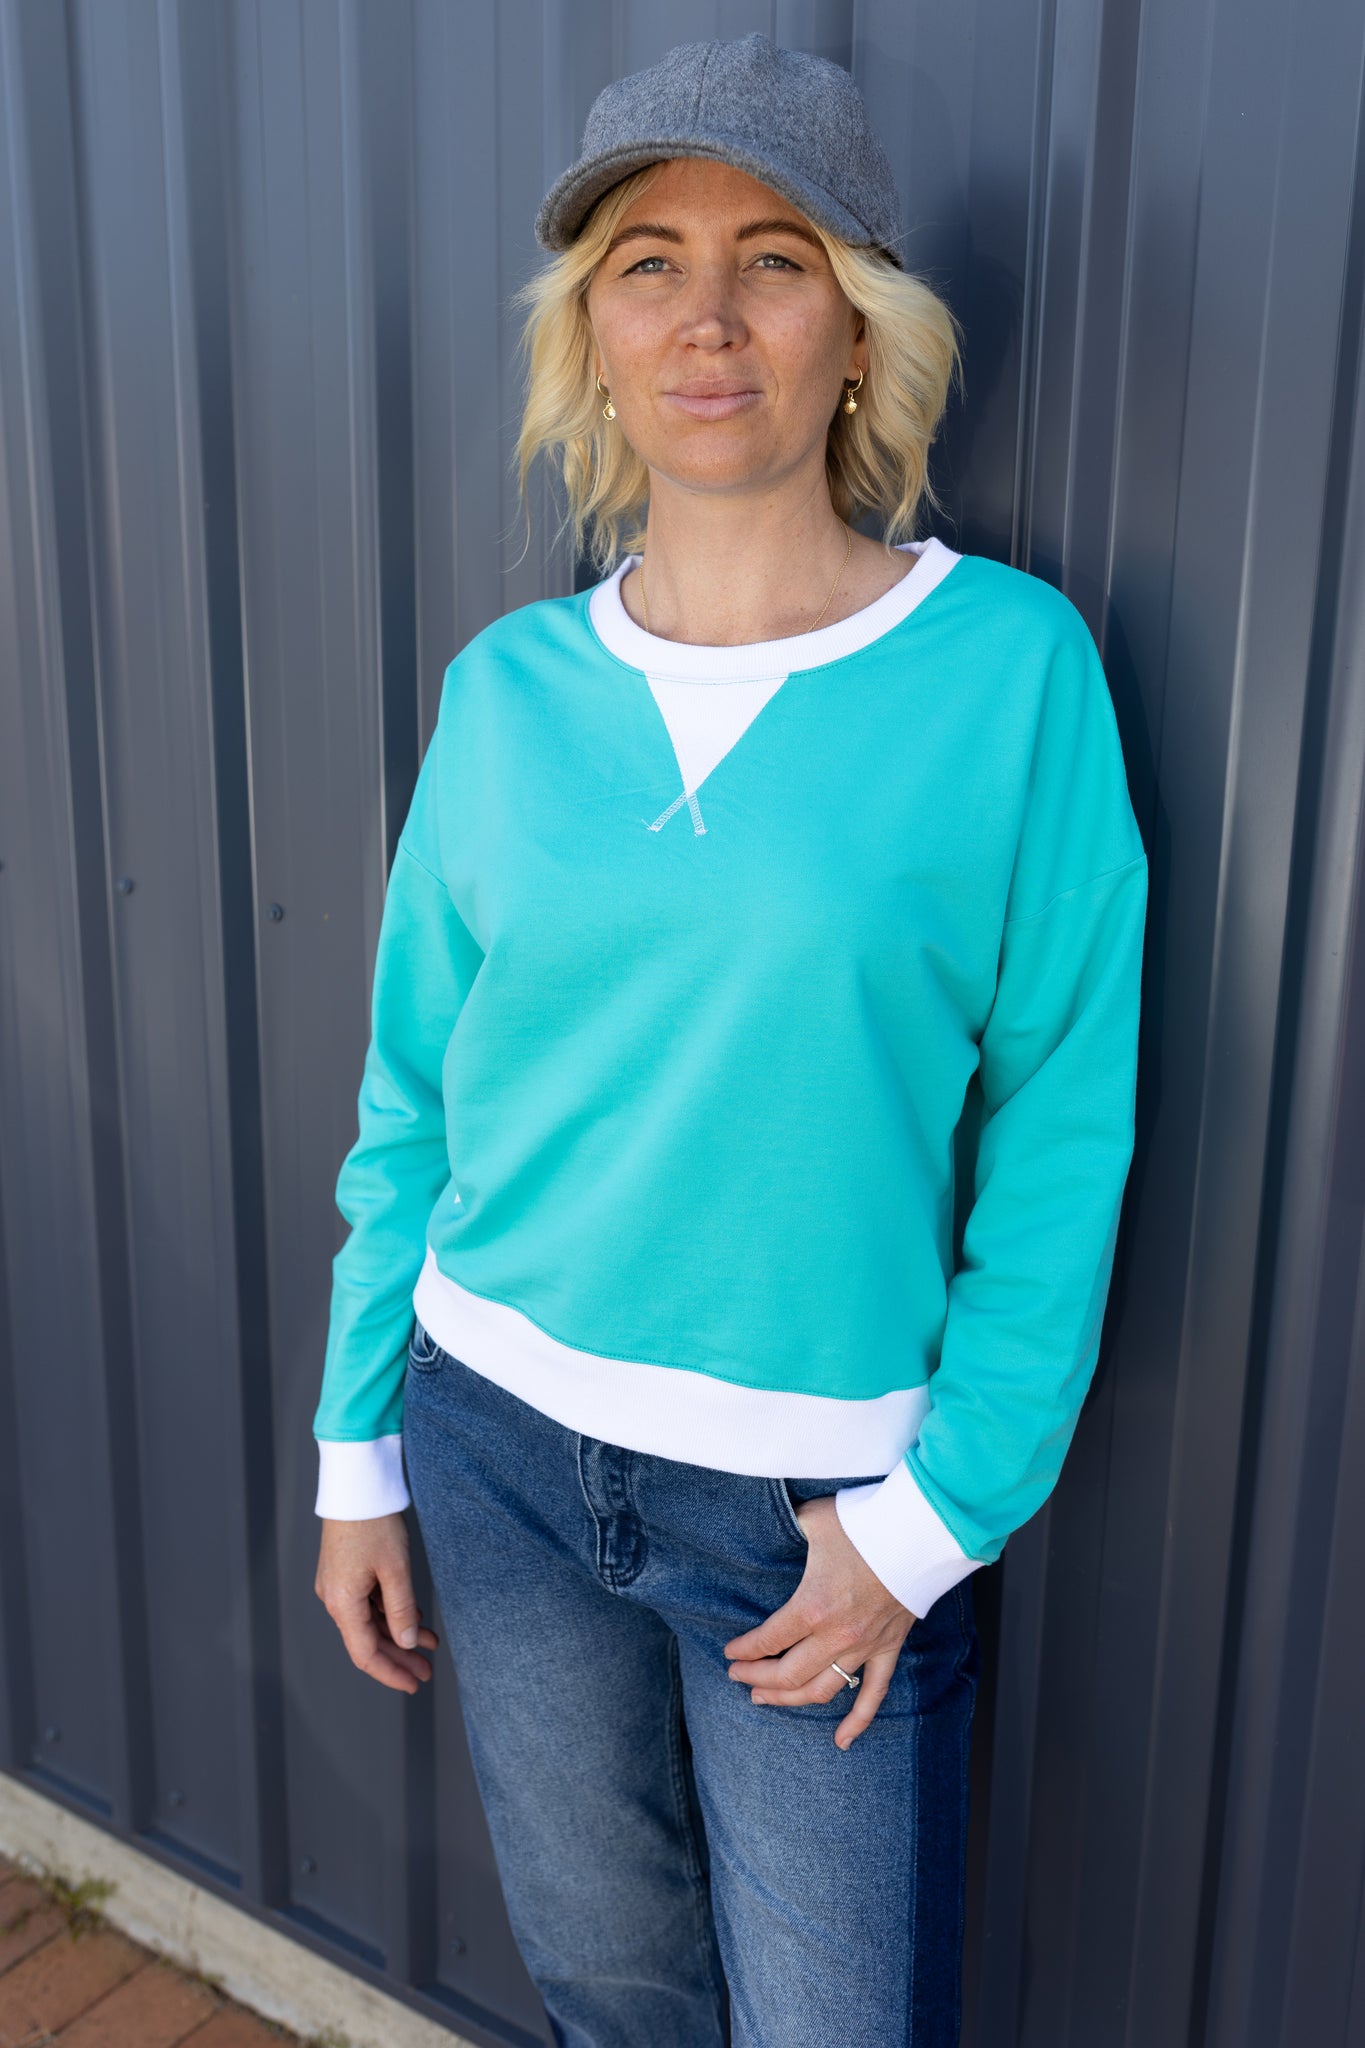 Heart Sweater with White Contrast - Bright Blue